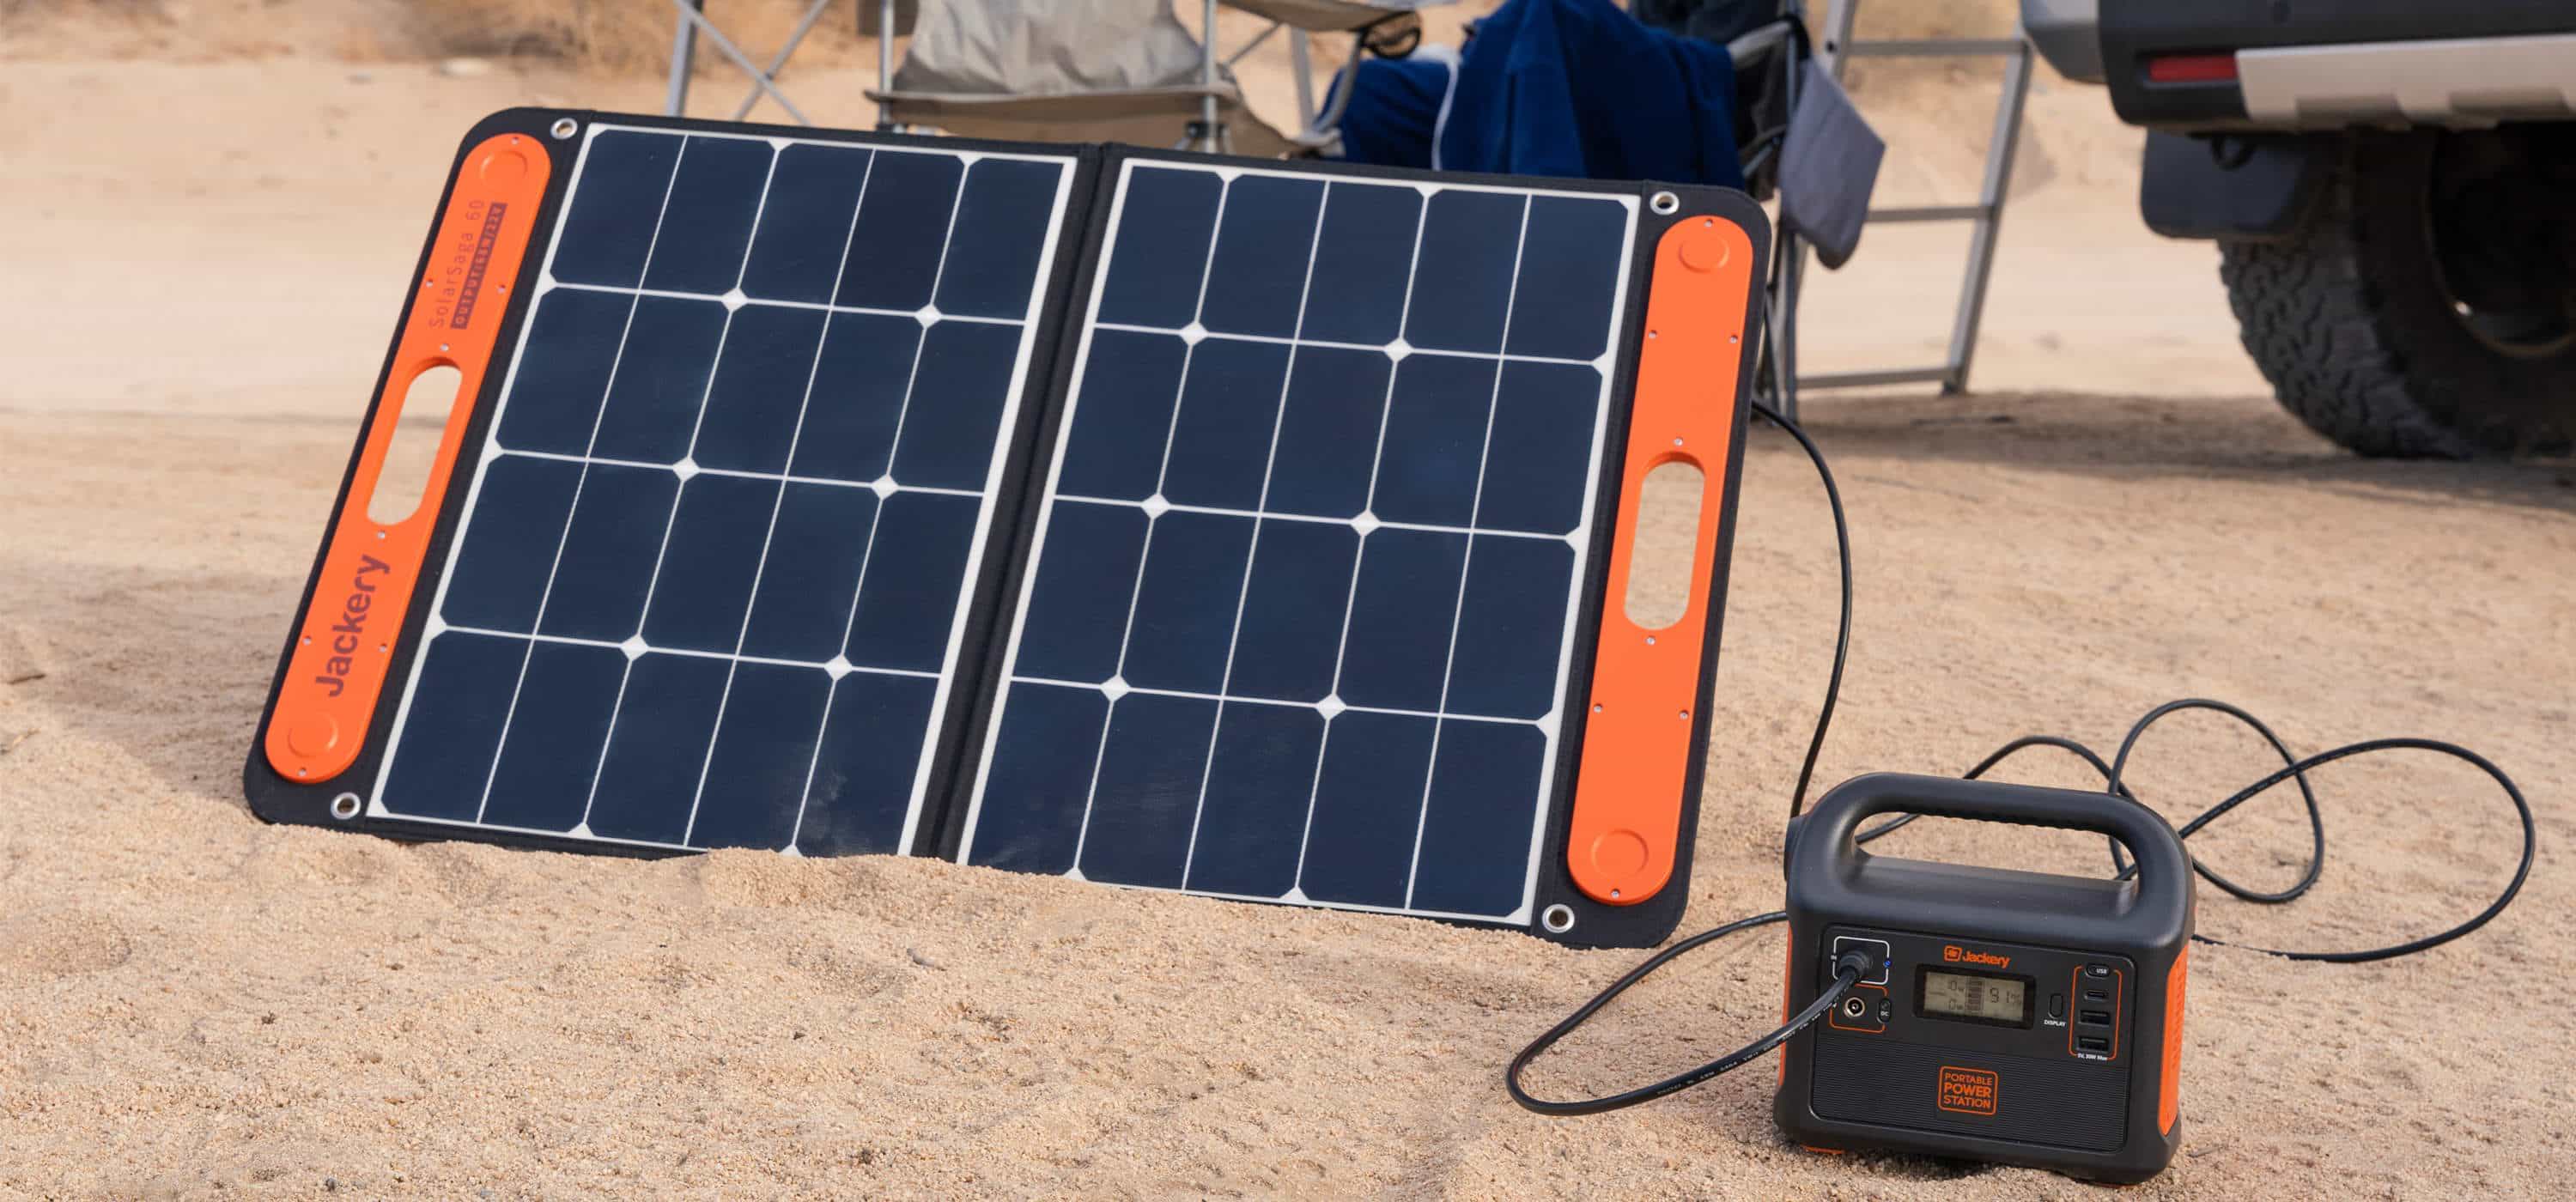 II. Benefits of Using Portable Solar Power Systems